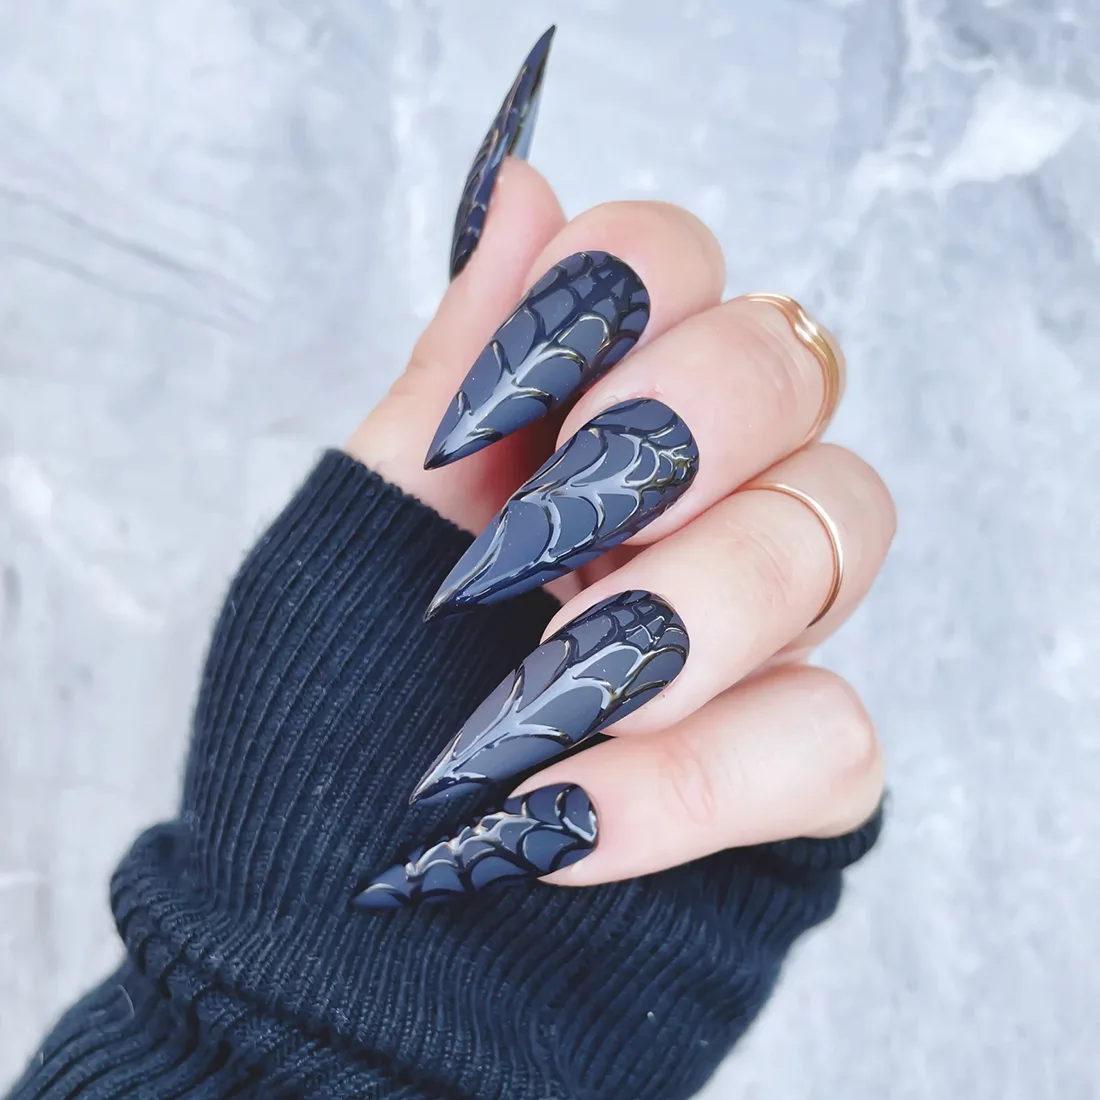 Matte black stiletto nails with a glossy black spiderweb design | Trendy Fall Nail Designs You Can Buy as Press-Ons on Etsy | Slashed Beauty